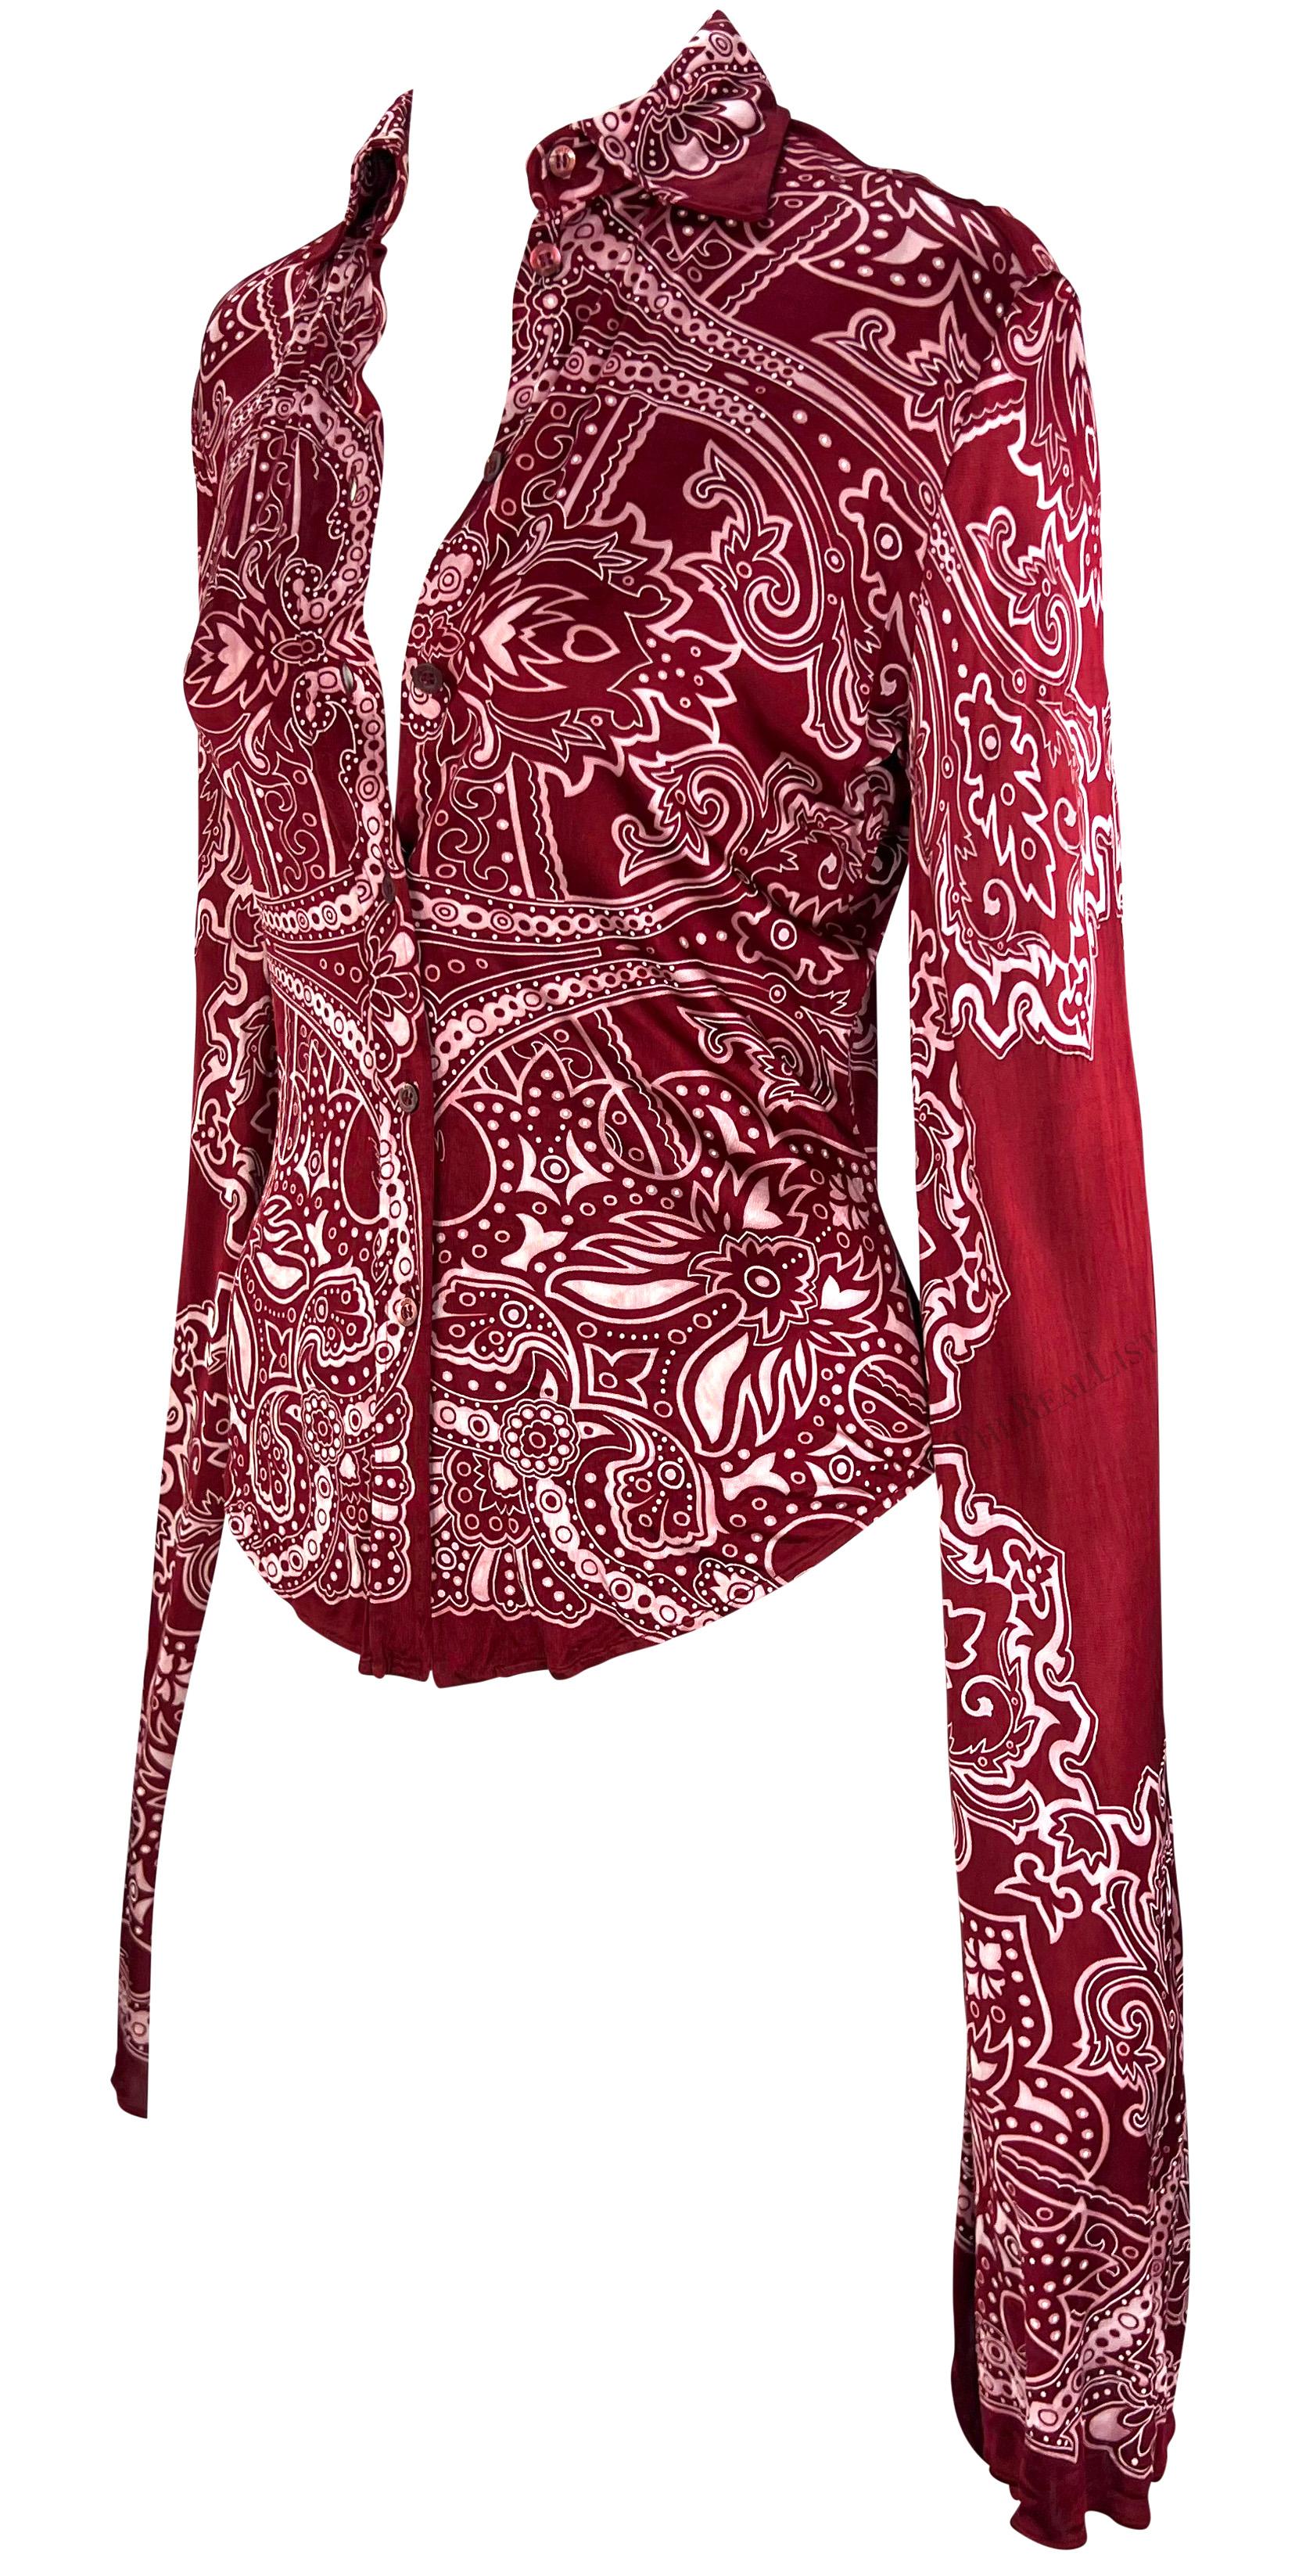 TheRealList presents: a chic red paisley Gucci button-down shirt, designed by Tom Ford. From the 2004 cruise collection, this viscose button-down top is covered in a bold red paisley print. Featuring a fold-over collar and button closure, this top